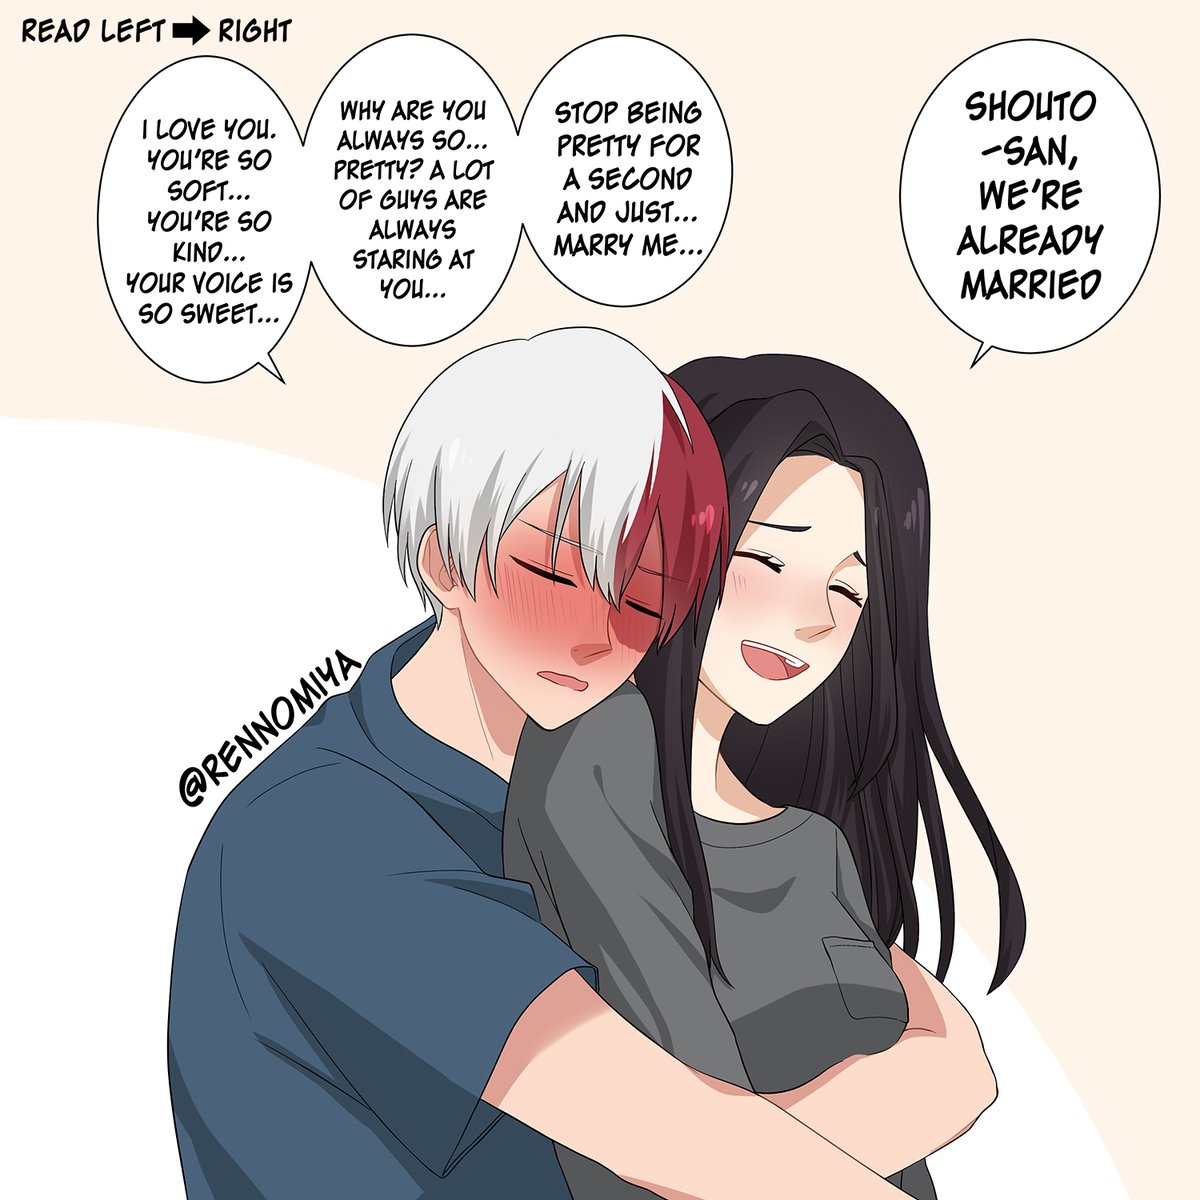 And then he fell asleep smiling after

#todomomo #轟百 